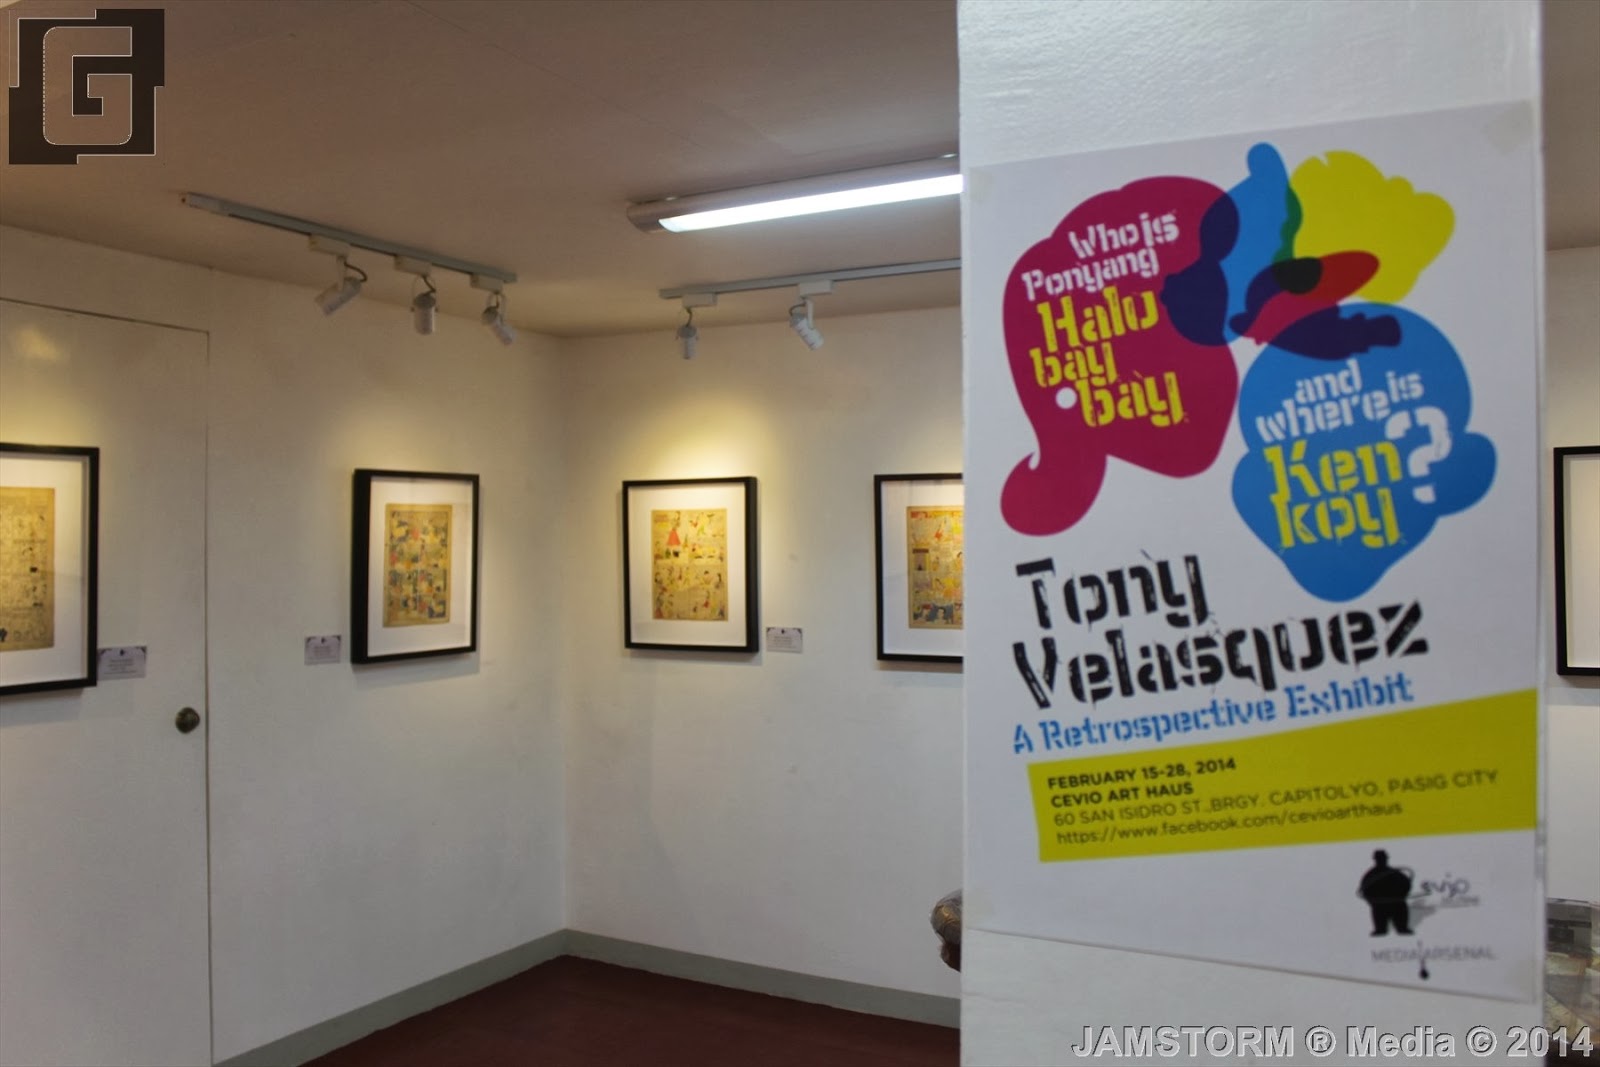 GeekMatic!: Sights & Highlights: Tony Velasquez Gallery!